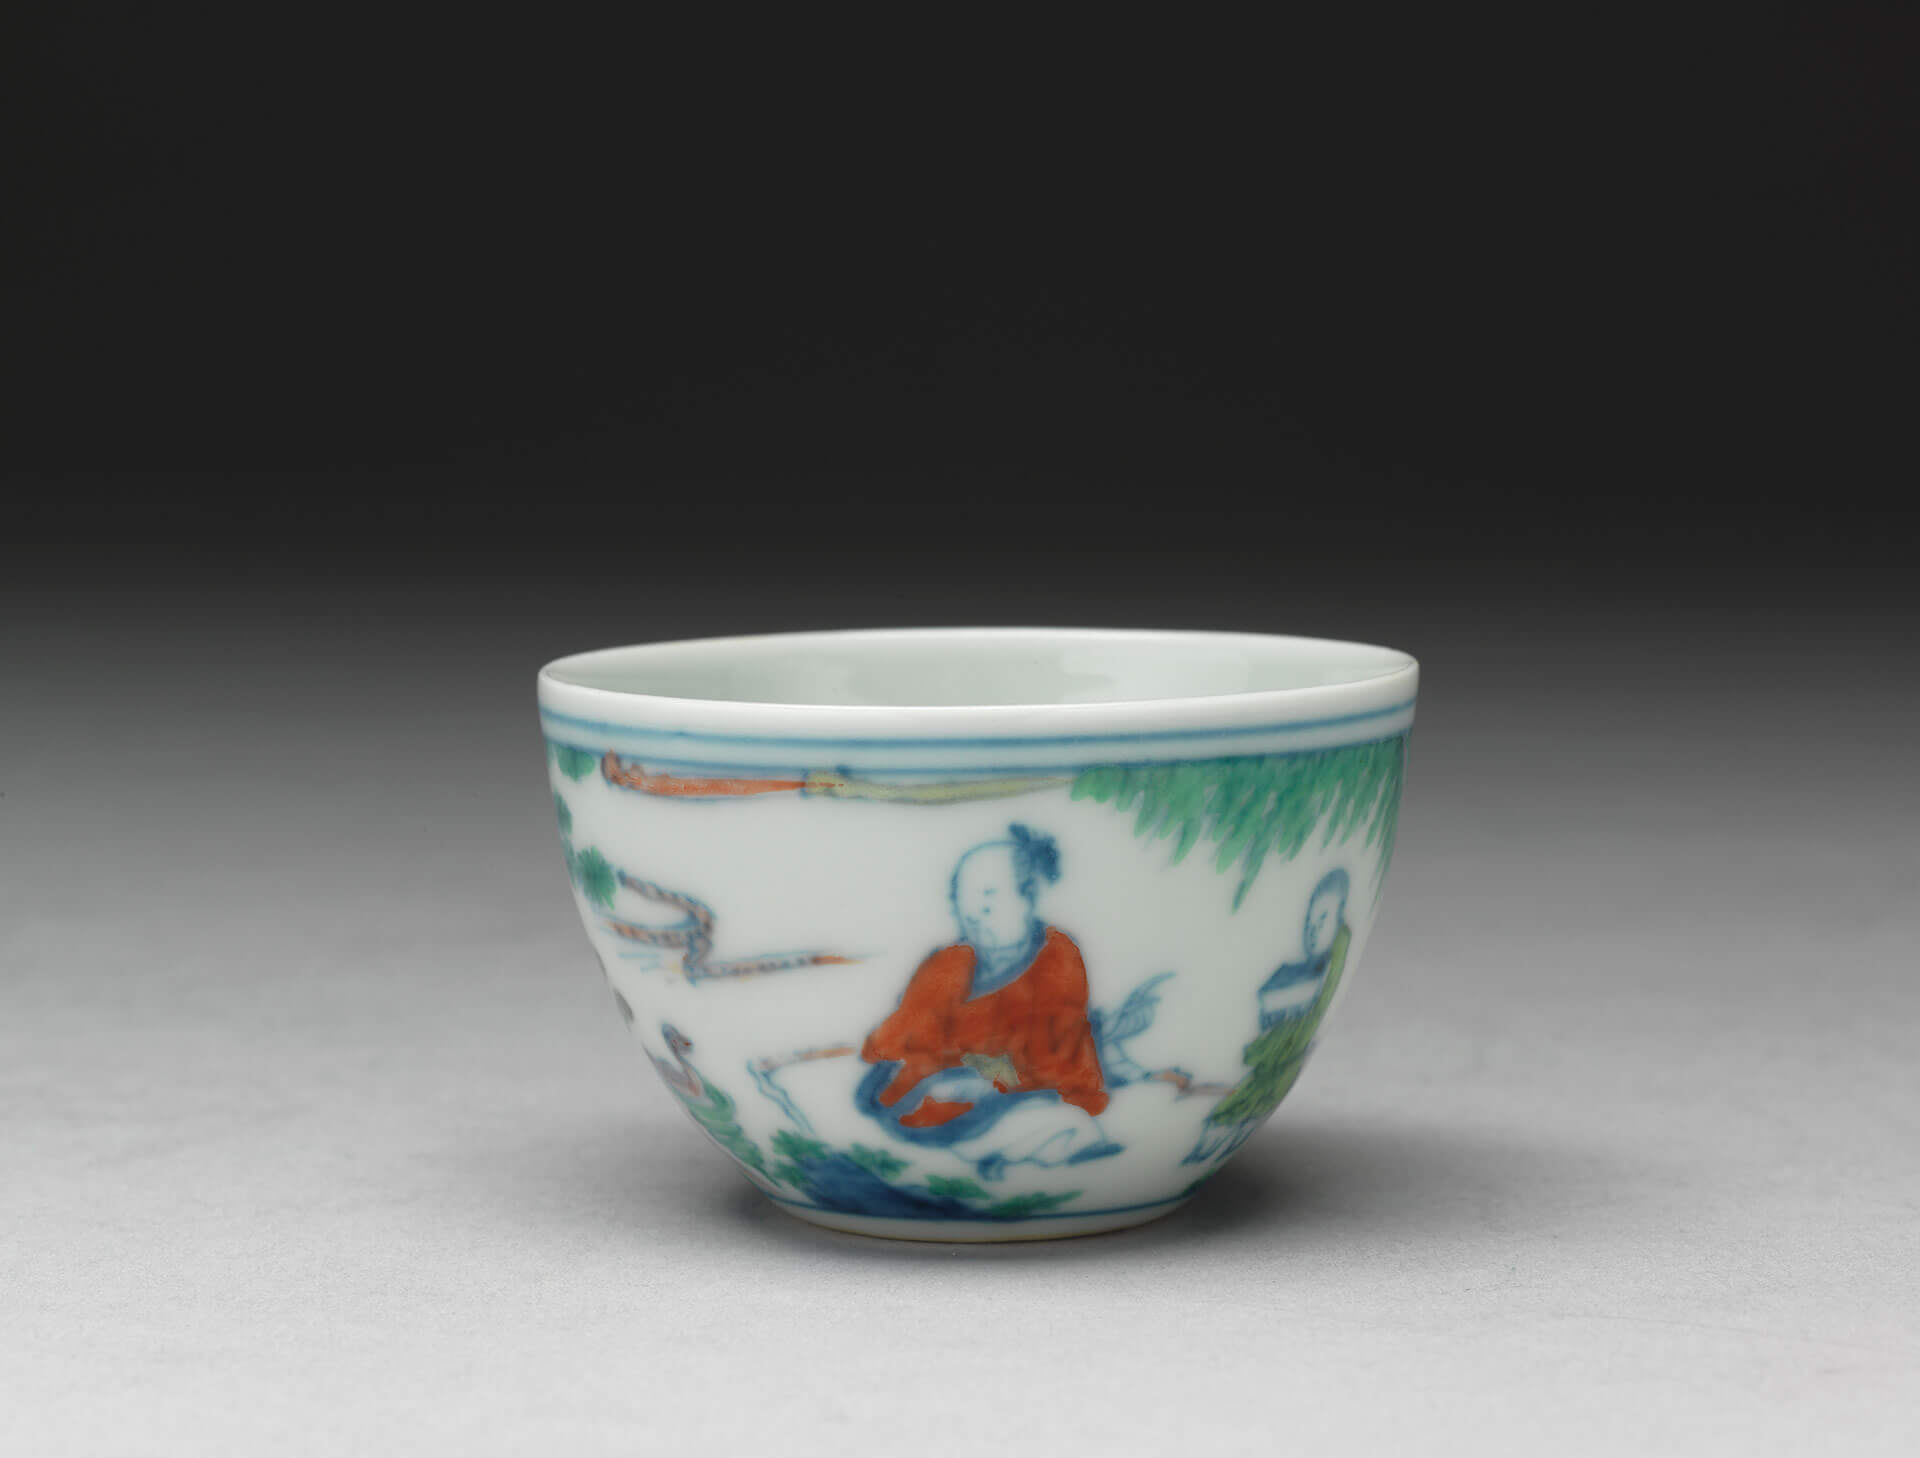 Cup decorated with figures in doucai polychrome enamels